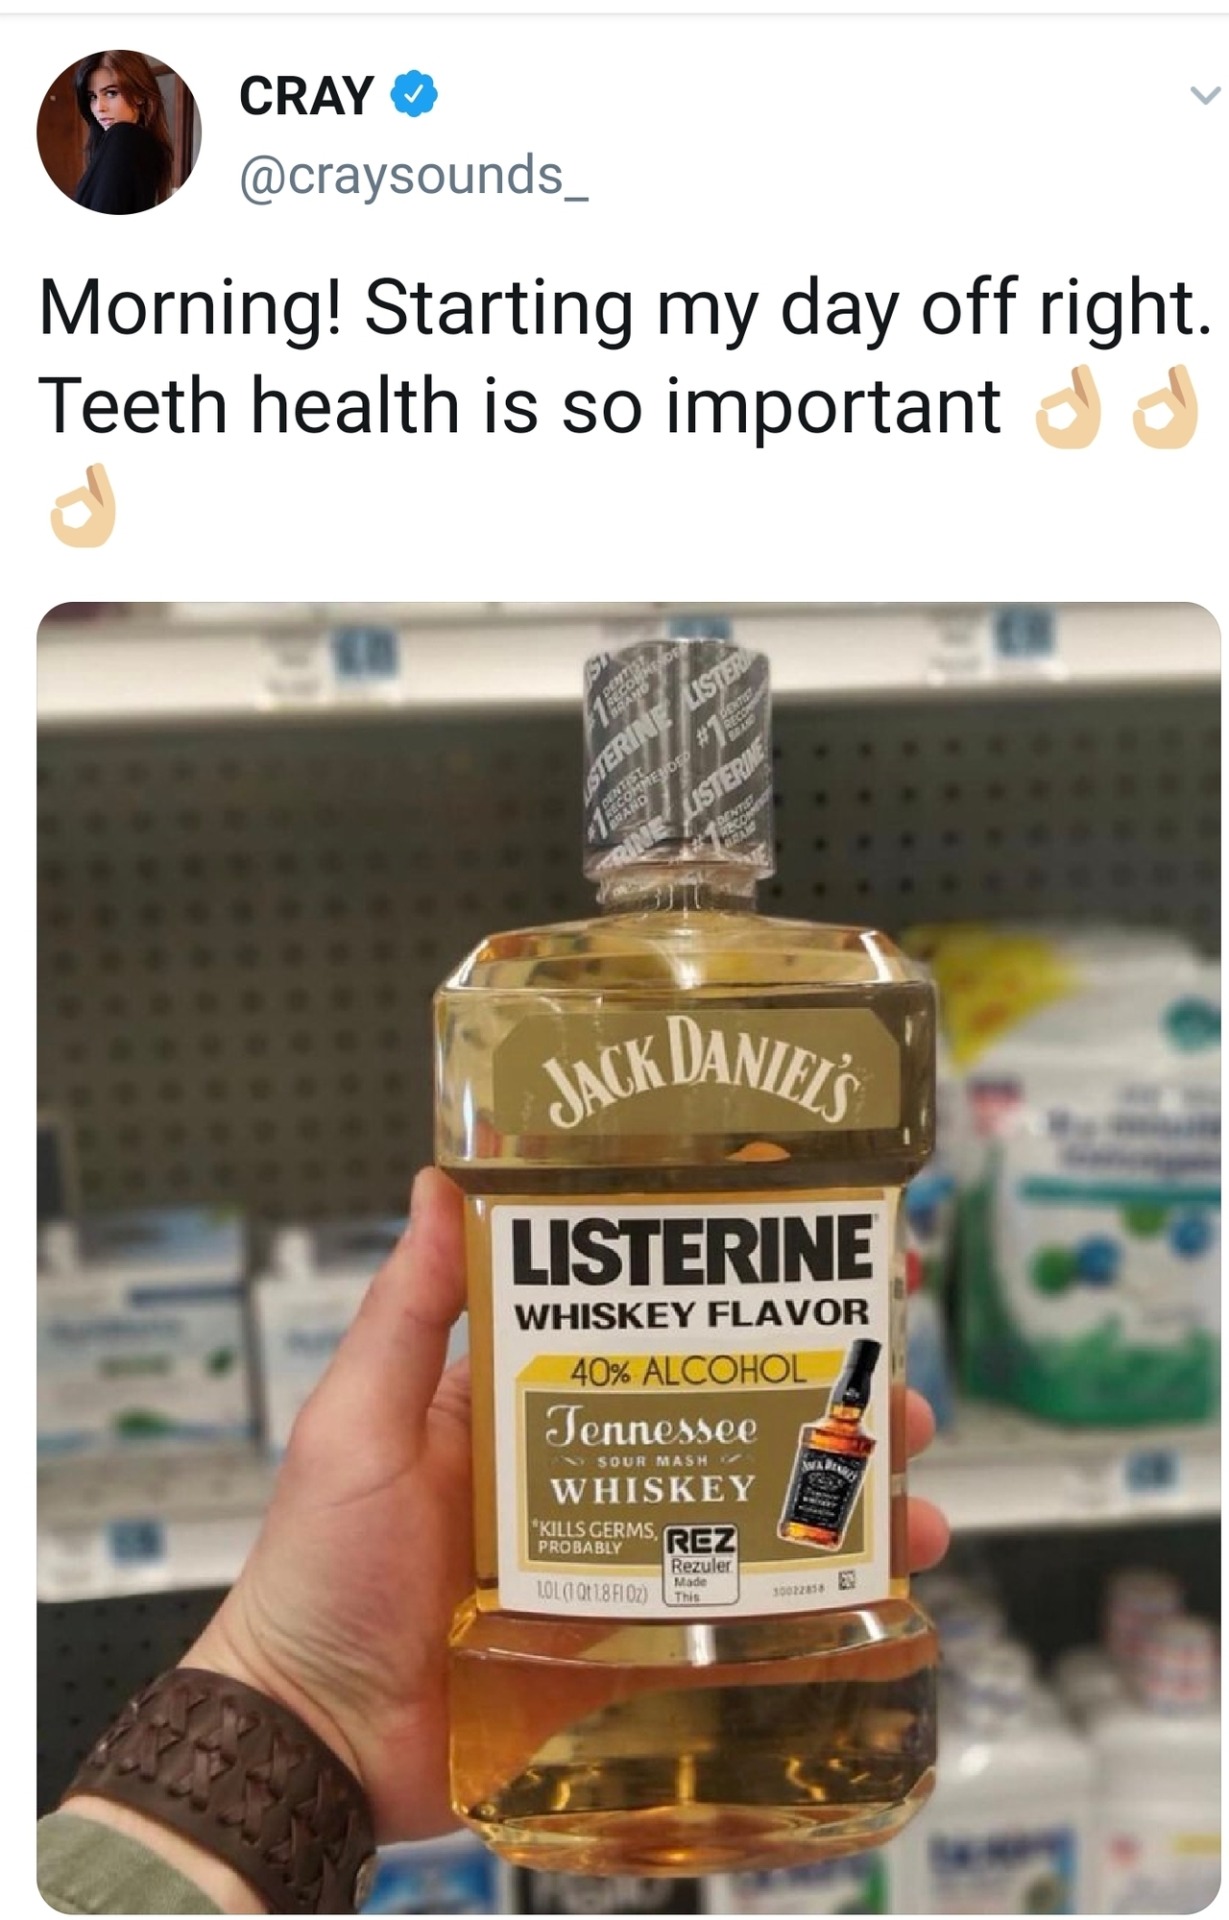 jack daniel's whiskey & cola - Cray Morning! Starting my day off right. Teeth health is so important dd Sterine Listen Menoed # Listerine Jack Danifes Listerine Whiskey Flavor 40% Alcohol Tennessee Sour Masm Whiskey Kills Germs, Probably Rezuler Made Lol 